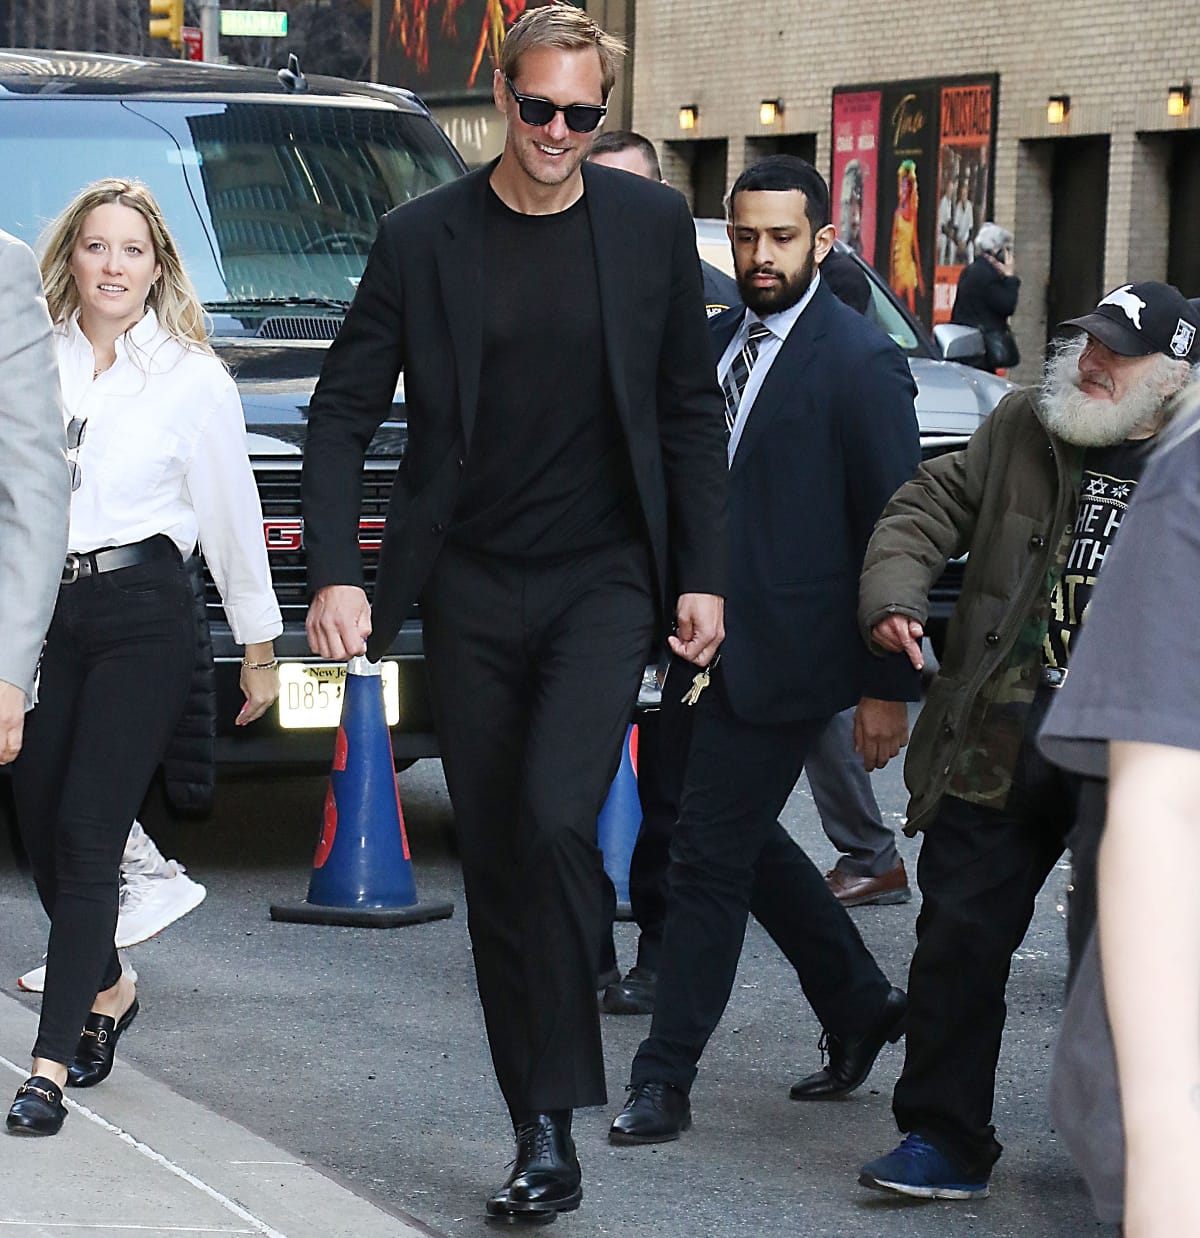 Alexander Skarsgård making everyone small in comparison while on his way to The Late Show with Stephen Colbert